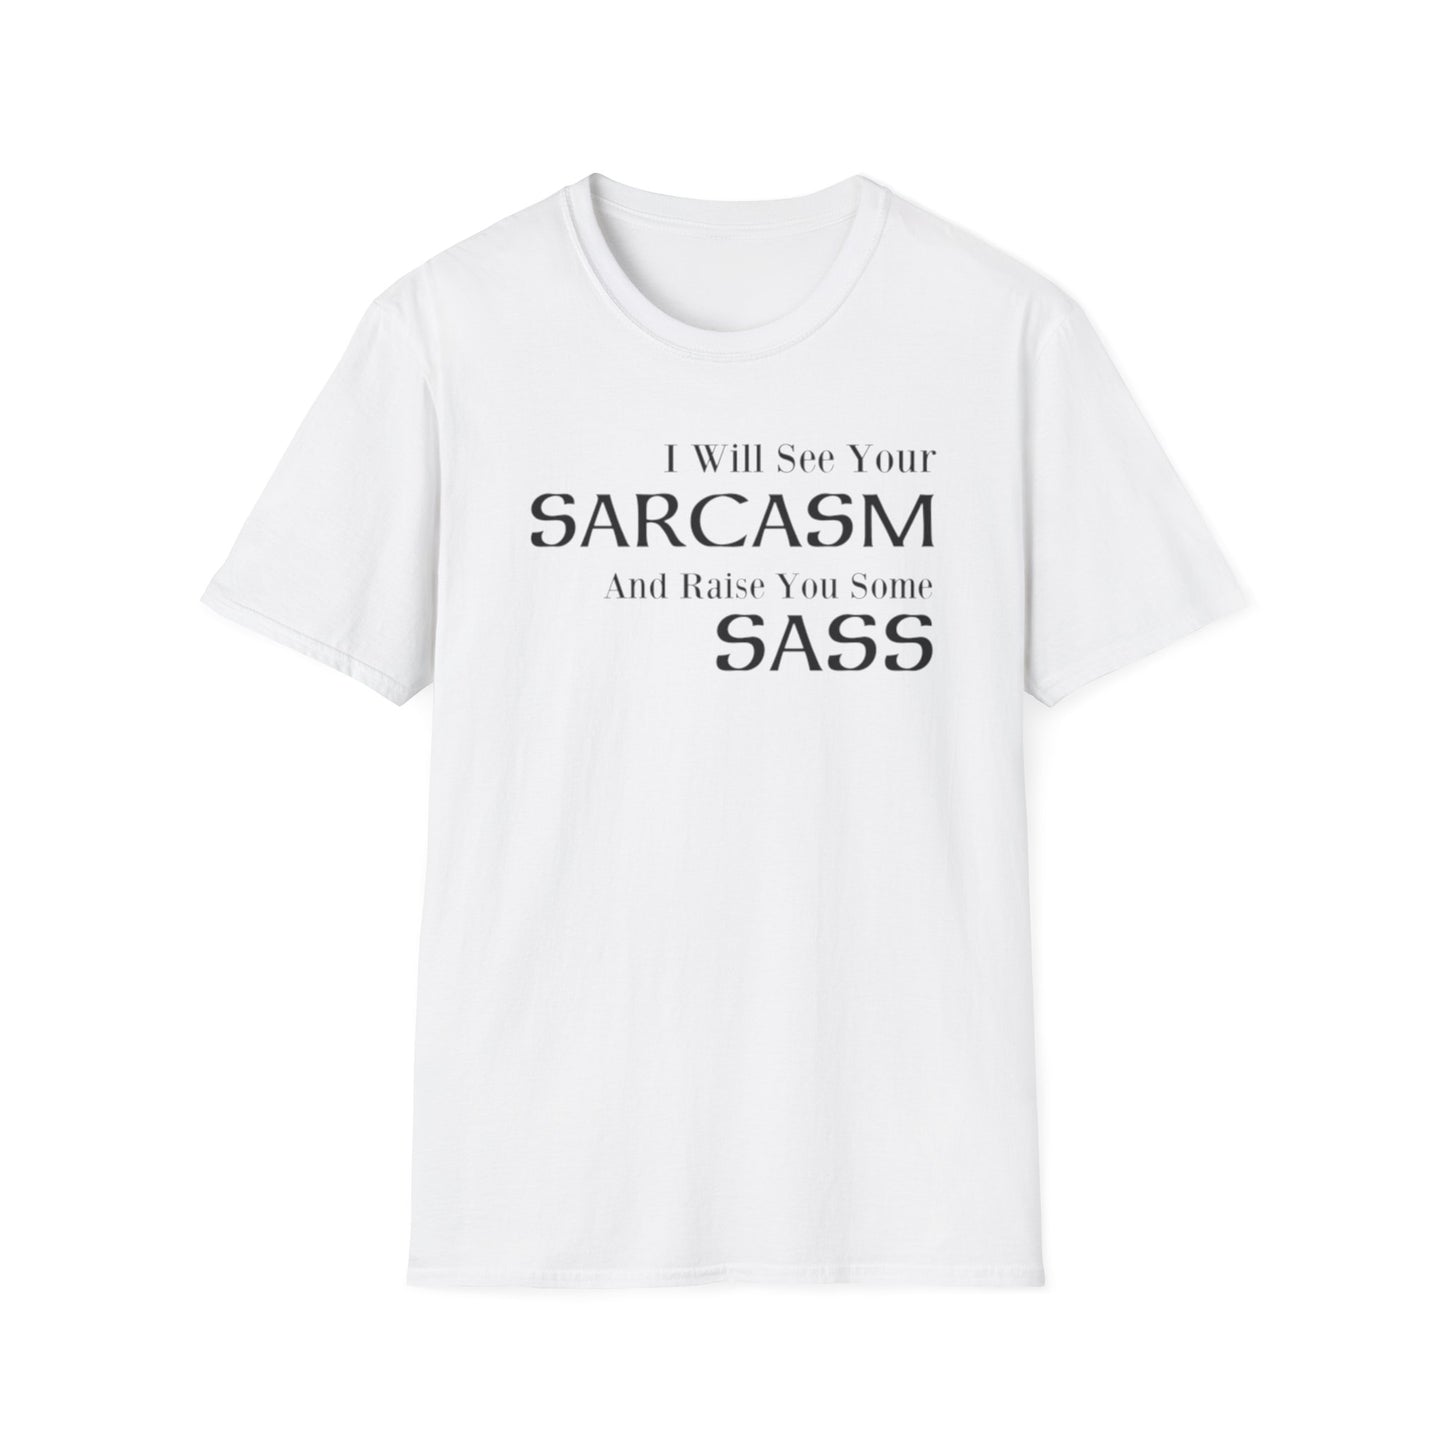 I Will See Your Sarcasm And Raise You Some Sass T-Shirt